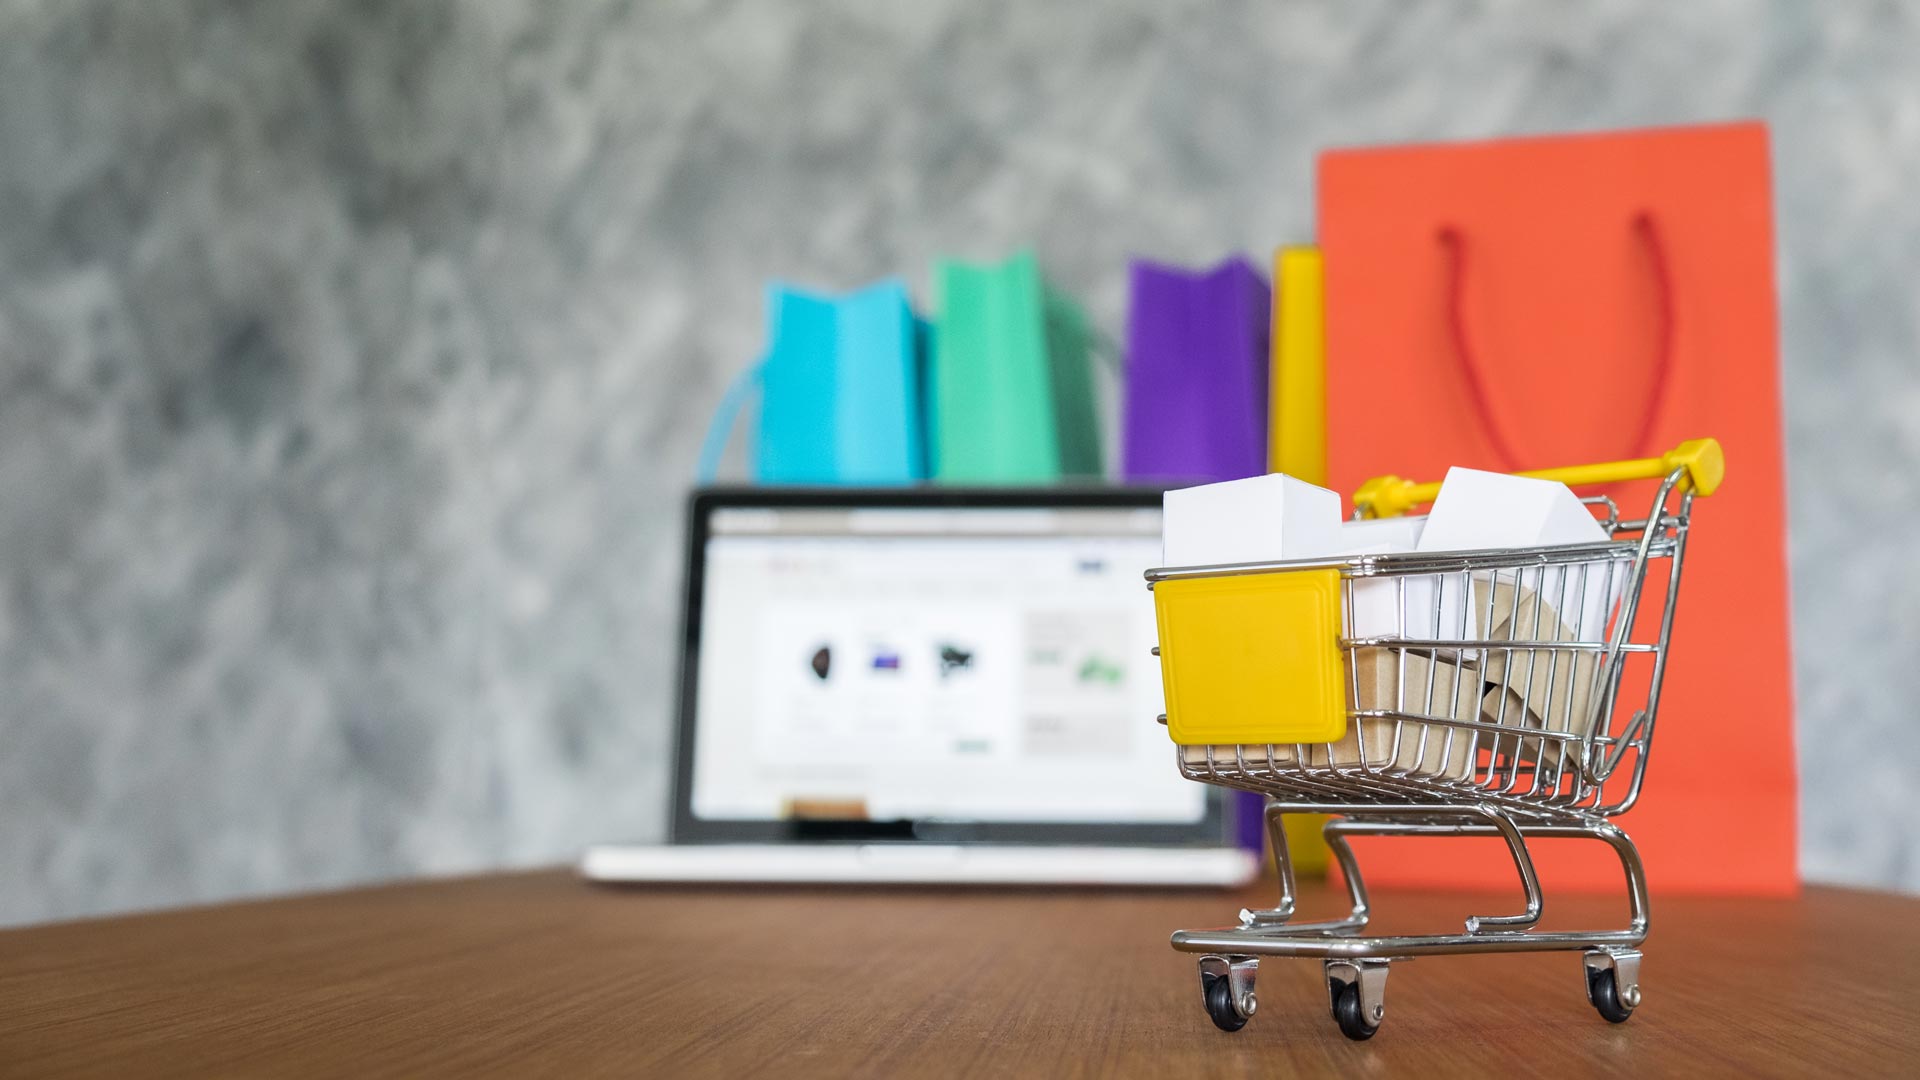 Trading vs. eCommerce – Which is Better? Can You Make Money from Dropshipping?